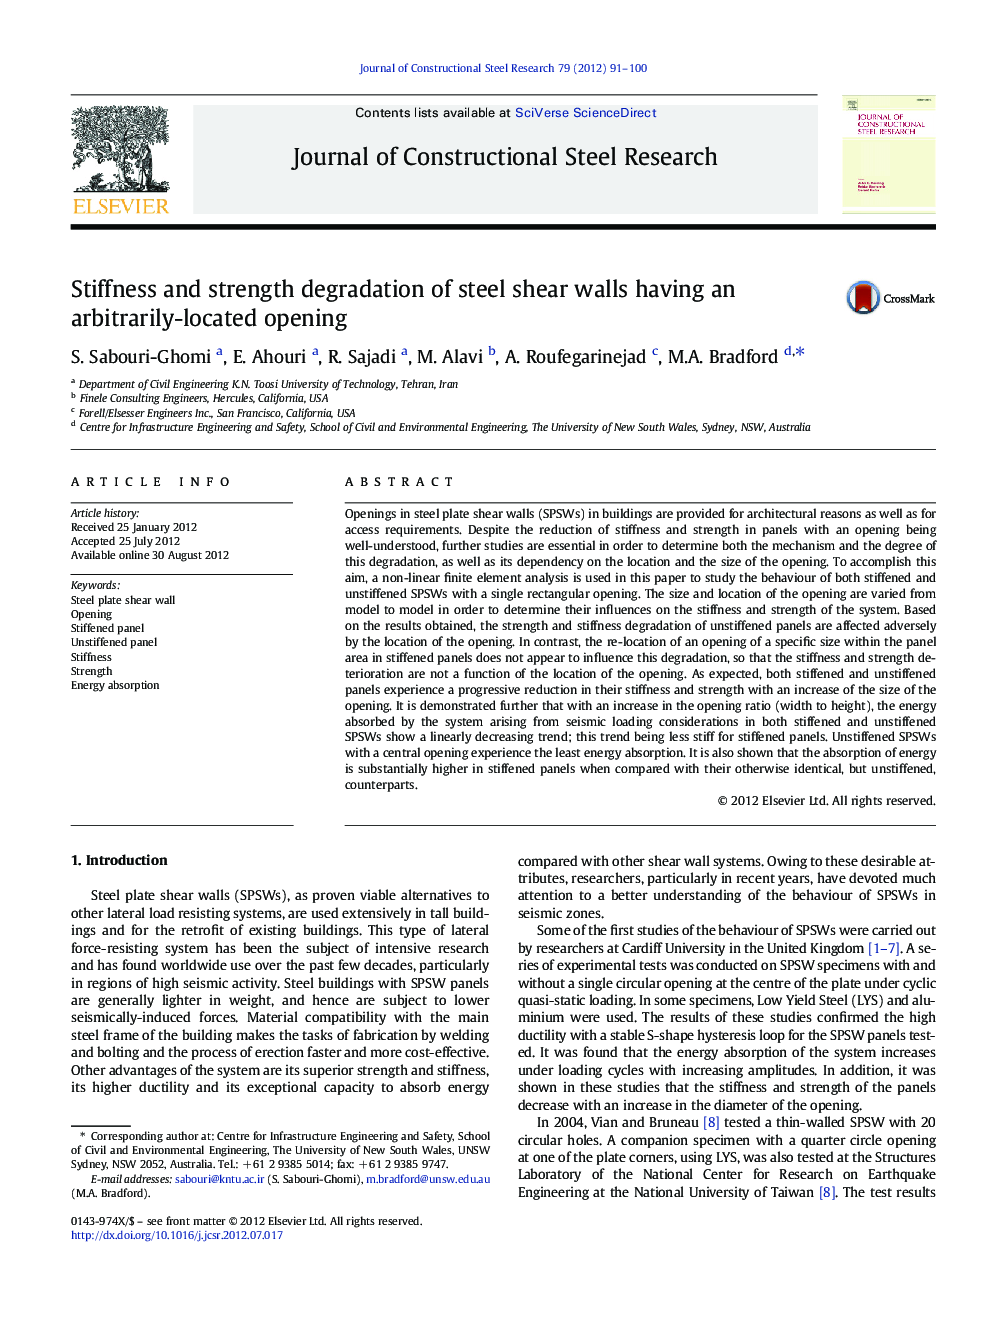 Stiffness and strength degradation of steel shear walls having an arbitrarily-located opening